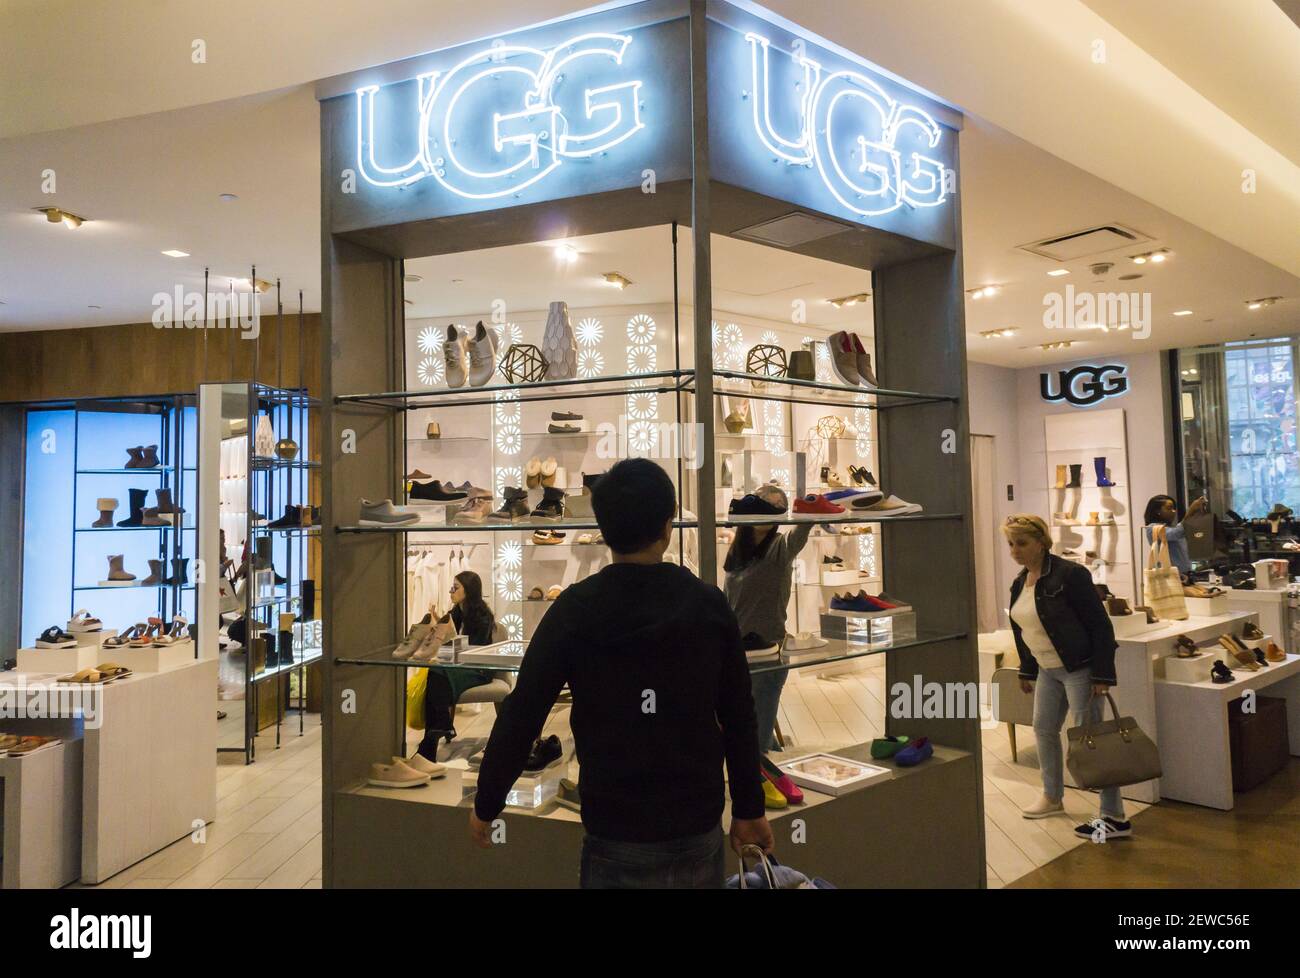 The Ugg boutique in the shoe department in the Macy's Herald Square  flagship store in New York on Monday, May 29, 2017. UGG is a brand of  Deckers Outdoor Corp. which also